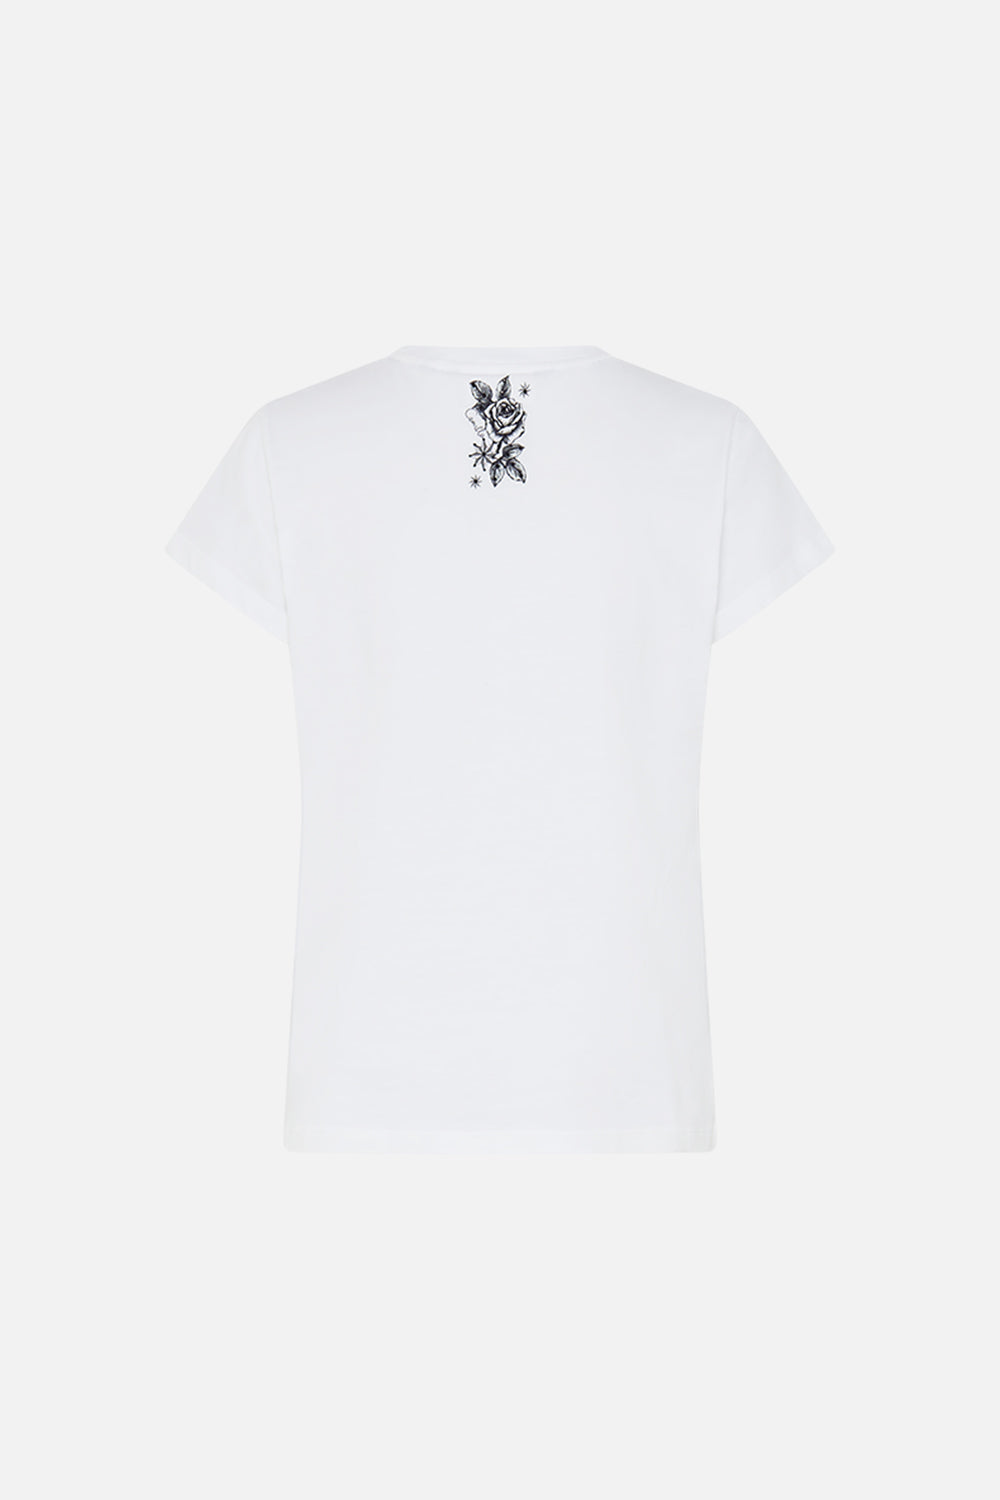 SLIM FIT ROUND NECK T-SHIRT - WHITE TALES OF TATTOO